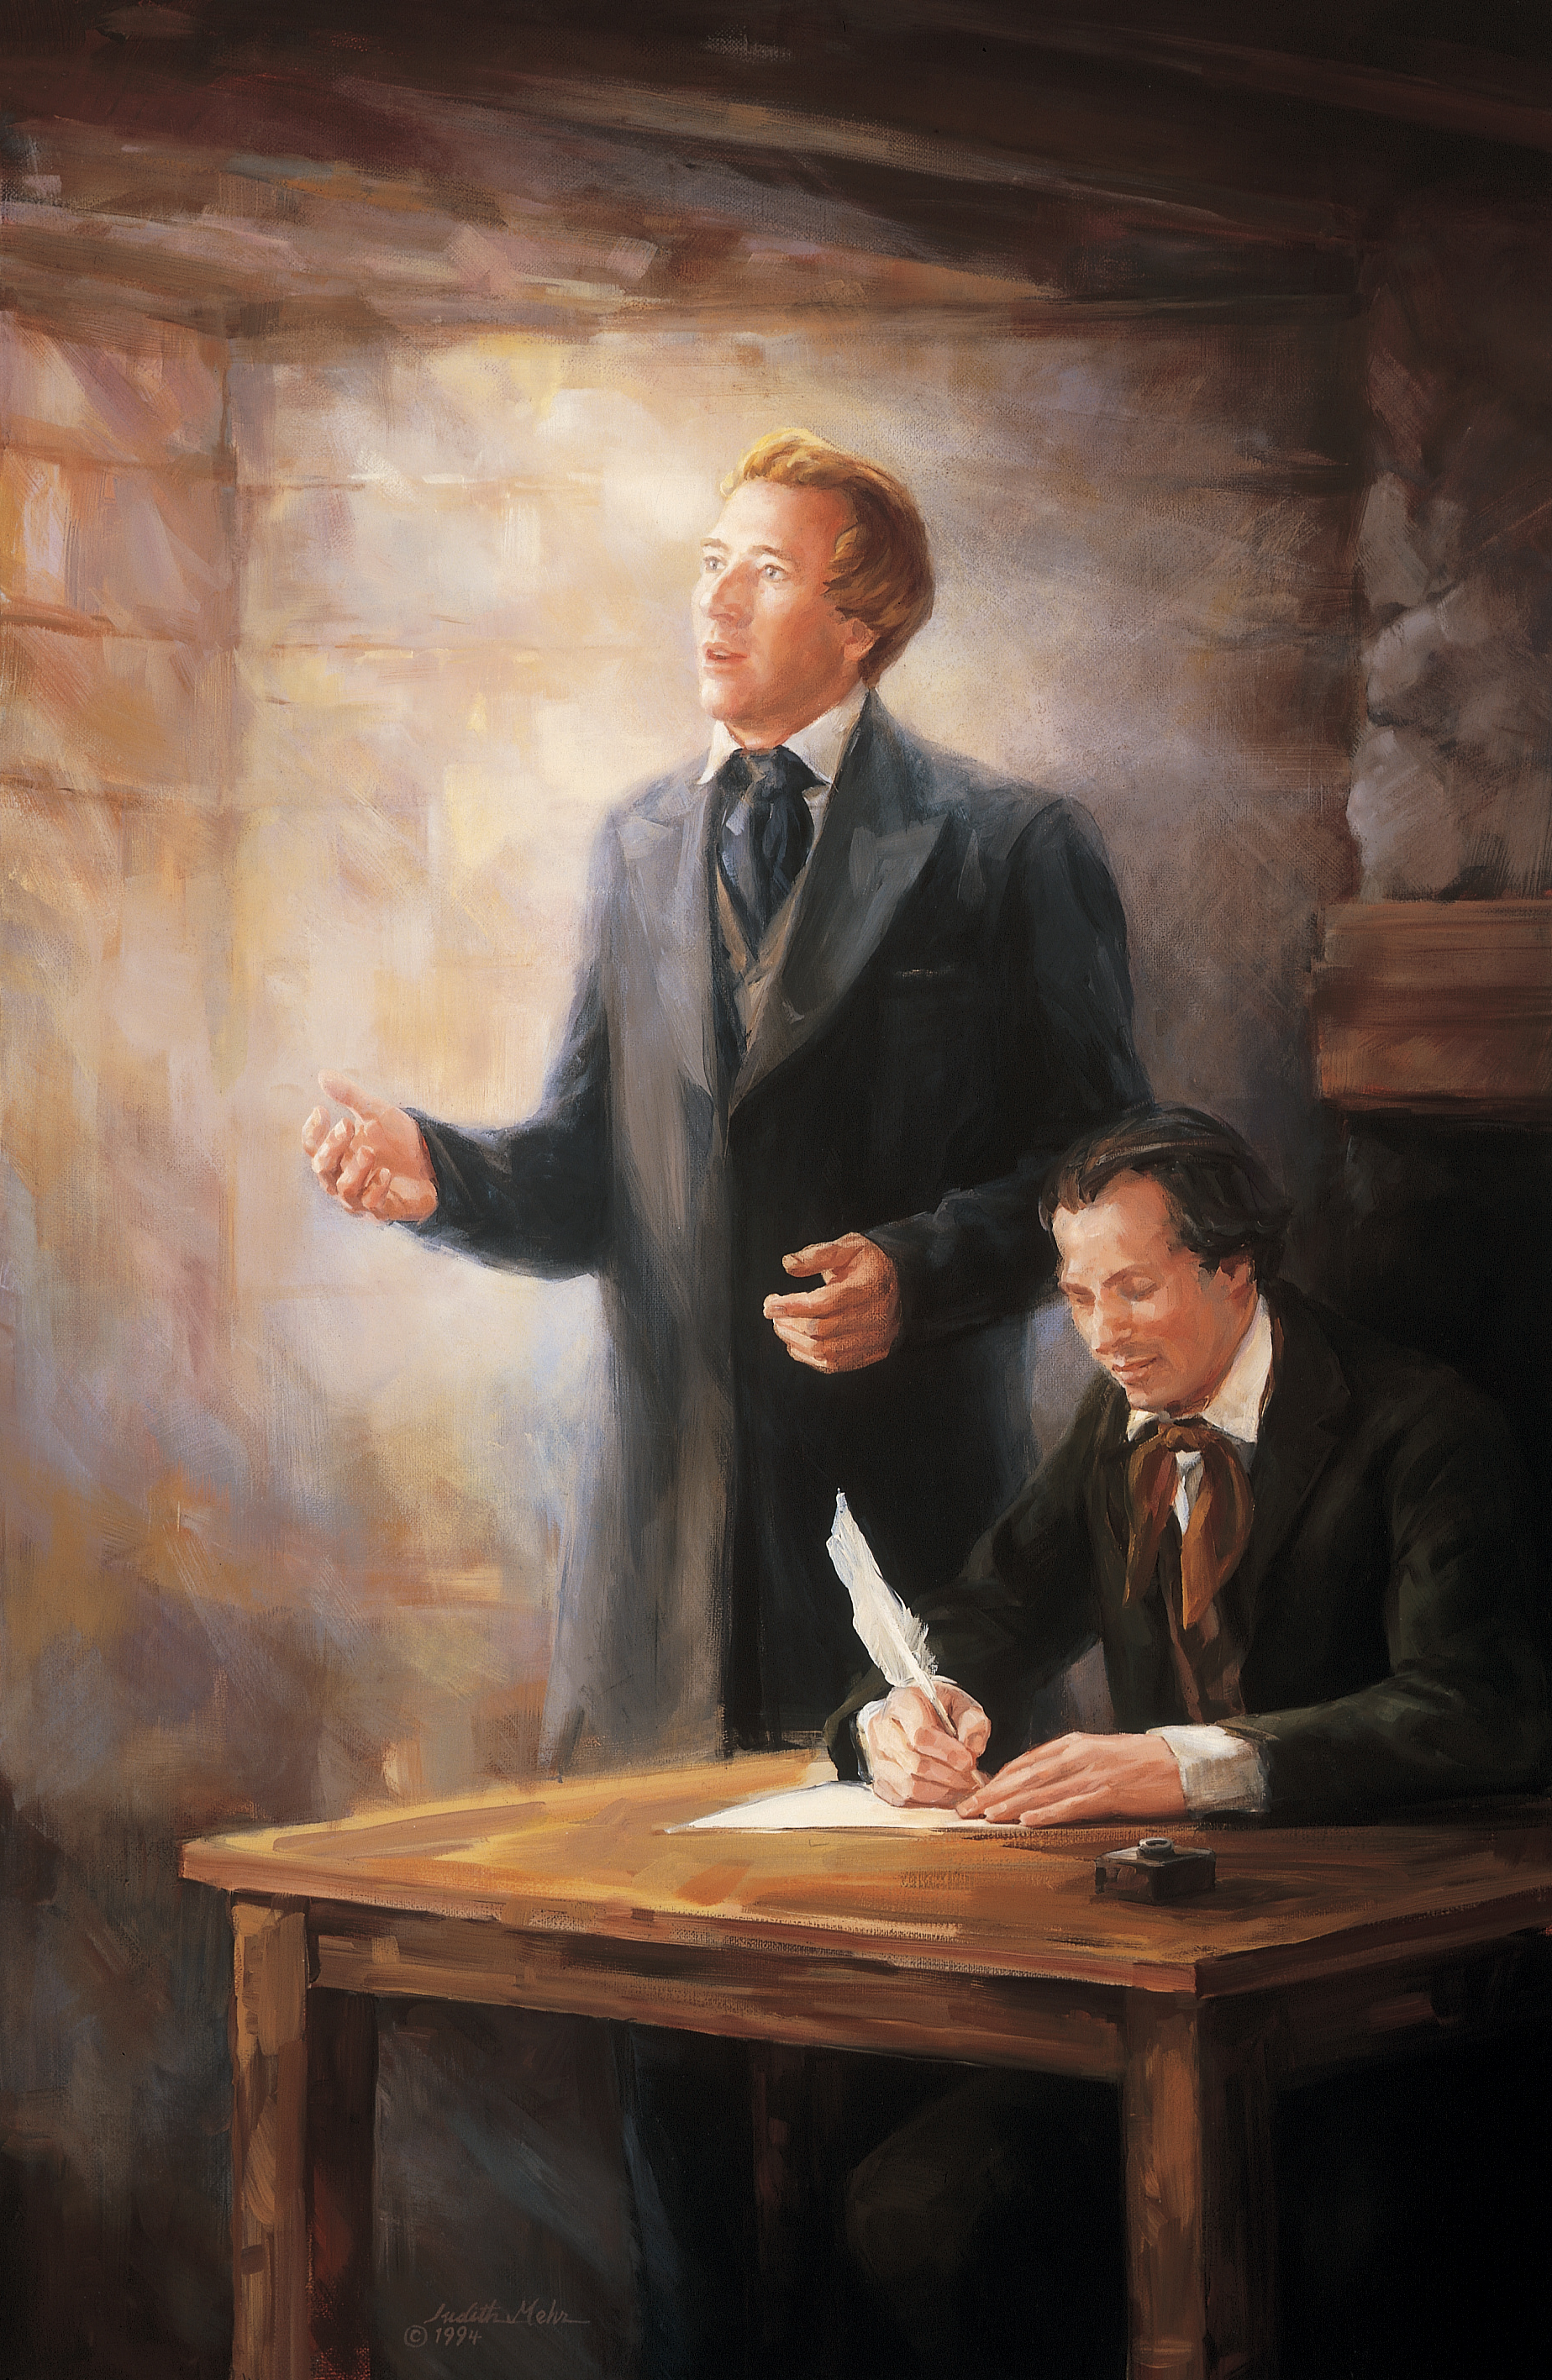 A painting by Judith A. Mehr of Joseph Smith standing and looking into the air as if talking to someone while Oliver Cowdery sits at a desk and is writing with a quill pen.